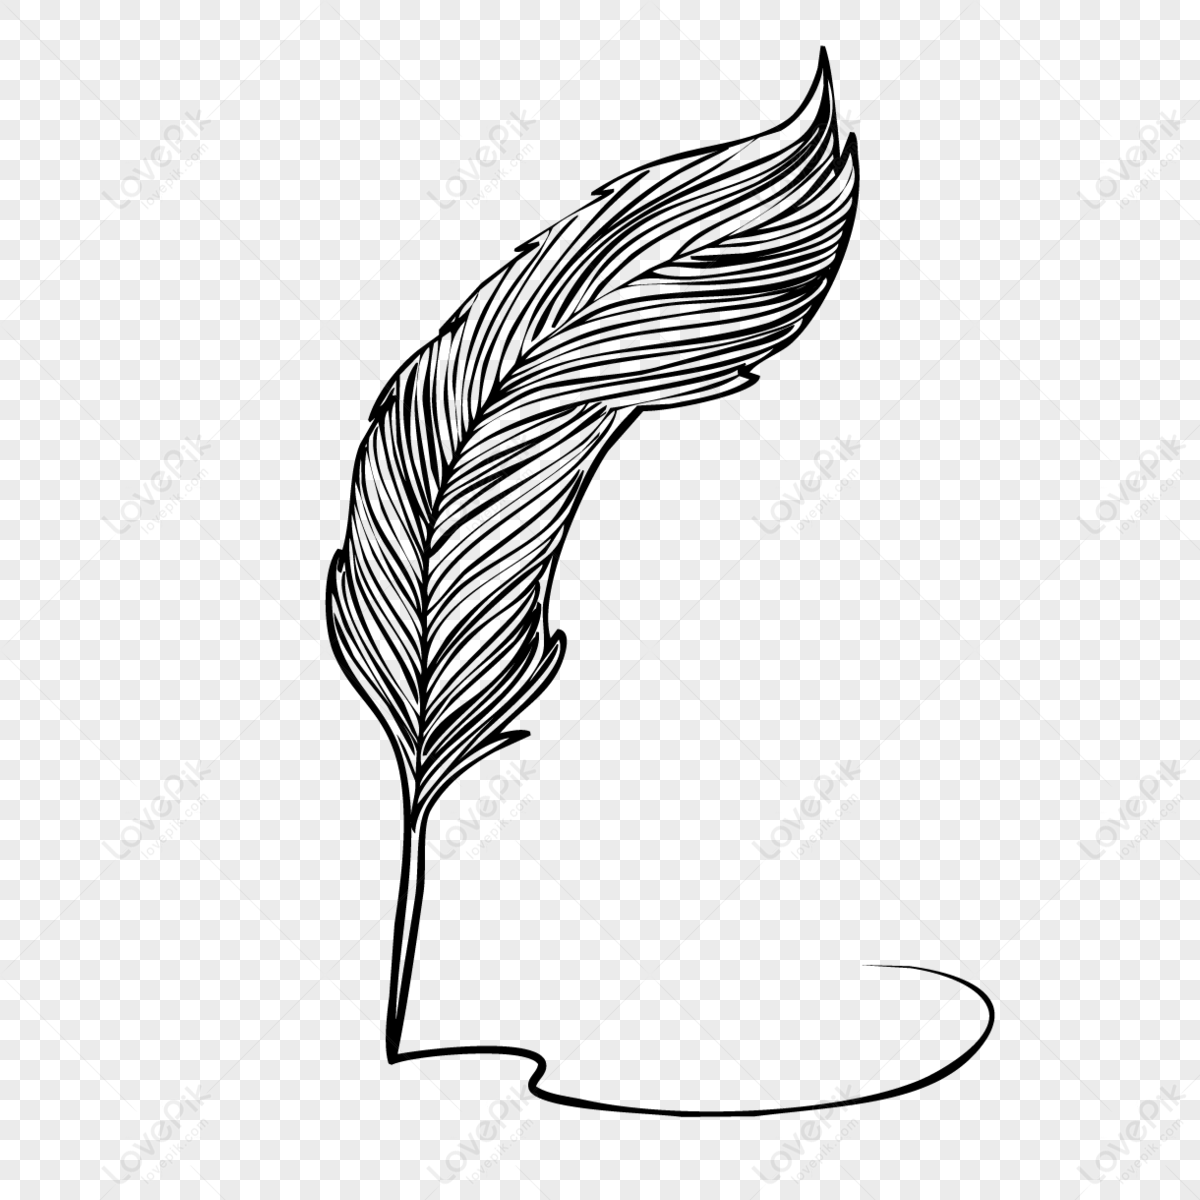 Hand drawn cartoon feather pen writing illustration,paint hand,handwriting png transparent background